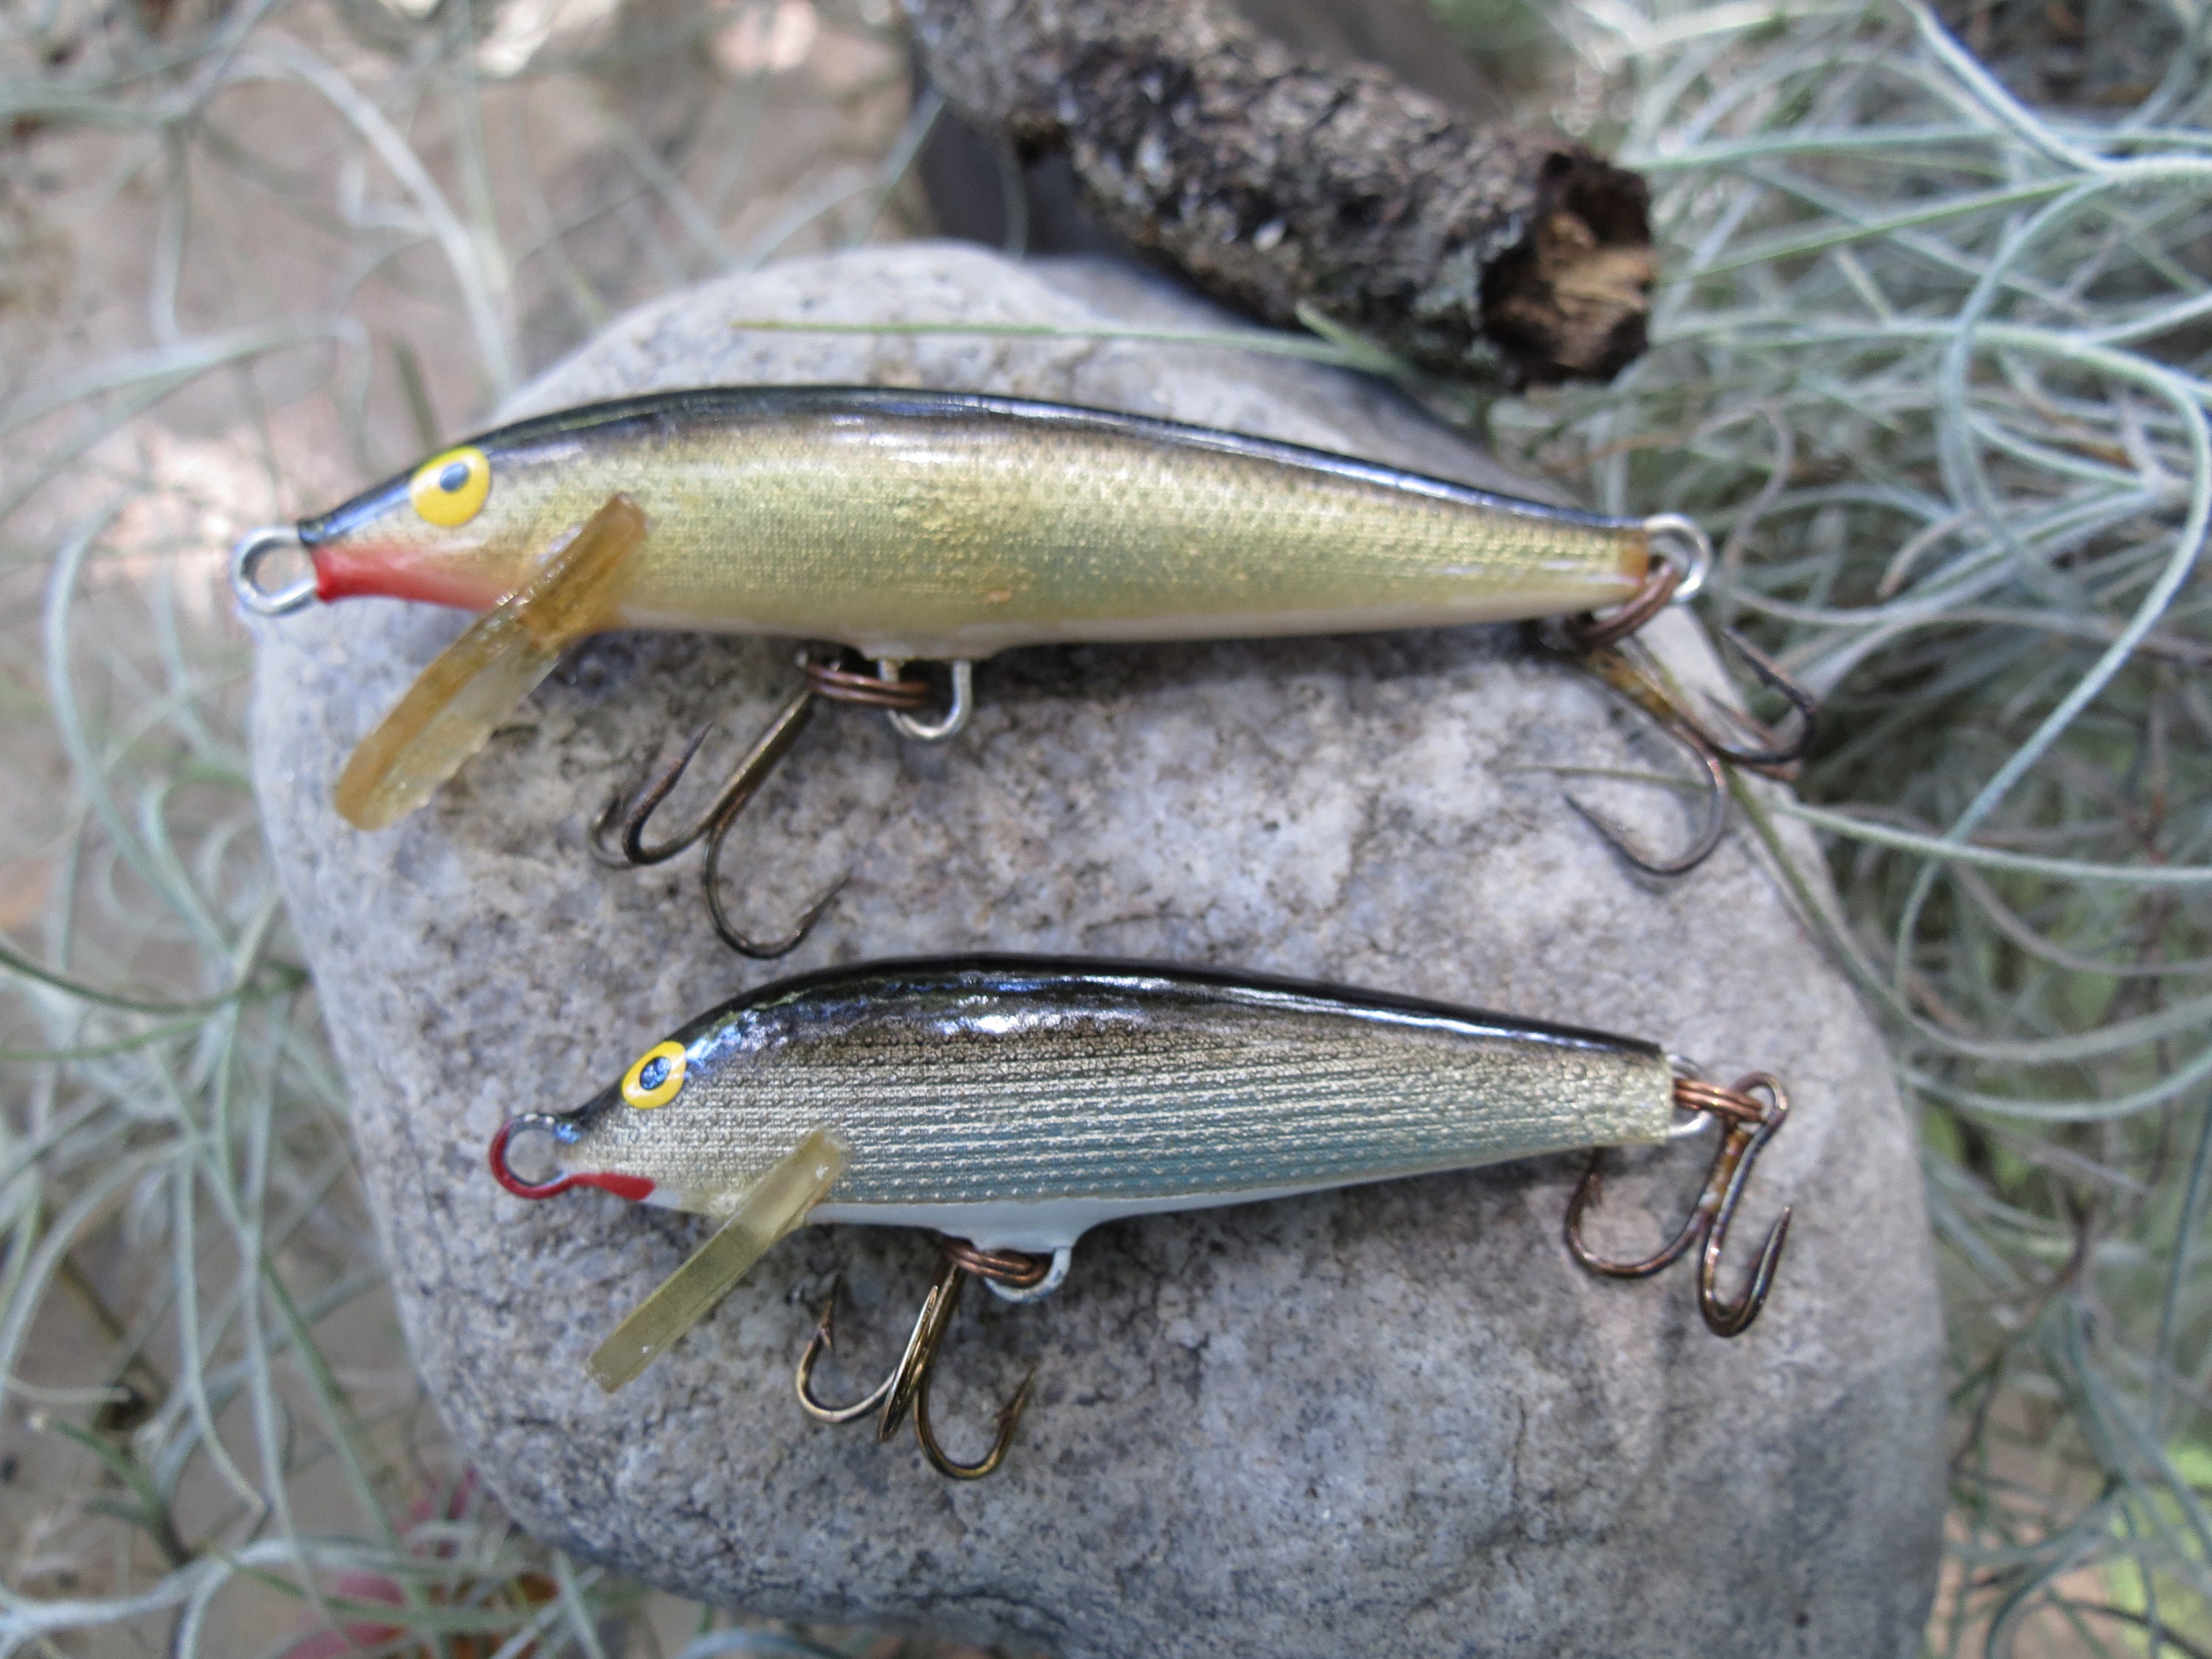 2 Floating Rapala Wood Fishing Lures Old Fish Bait Tackle Box Find